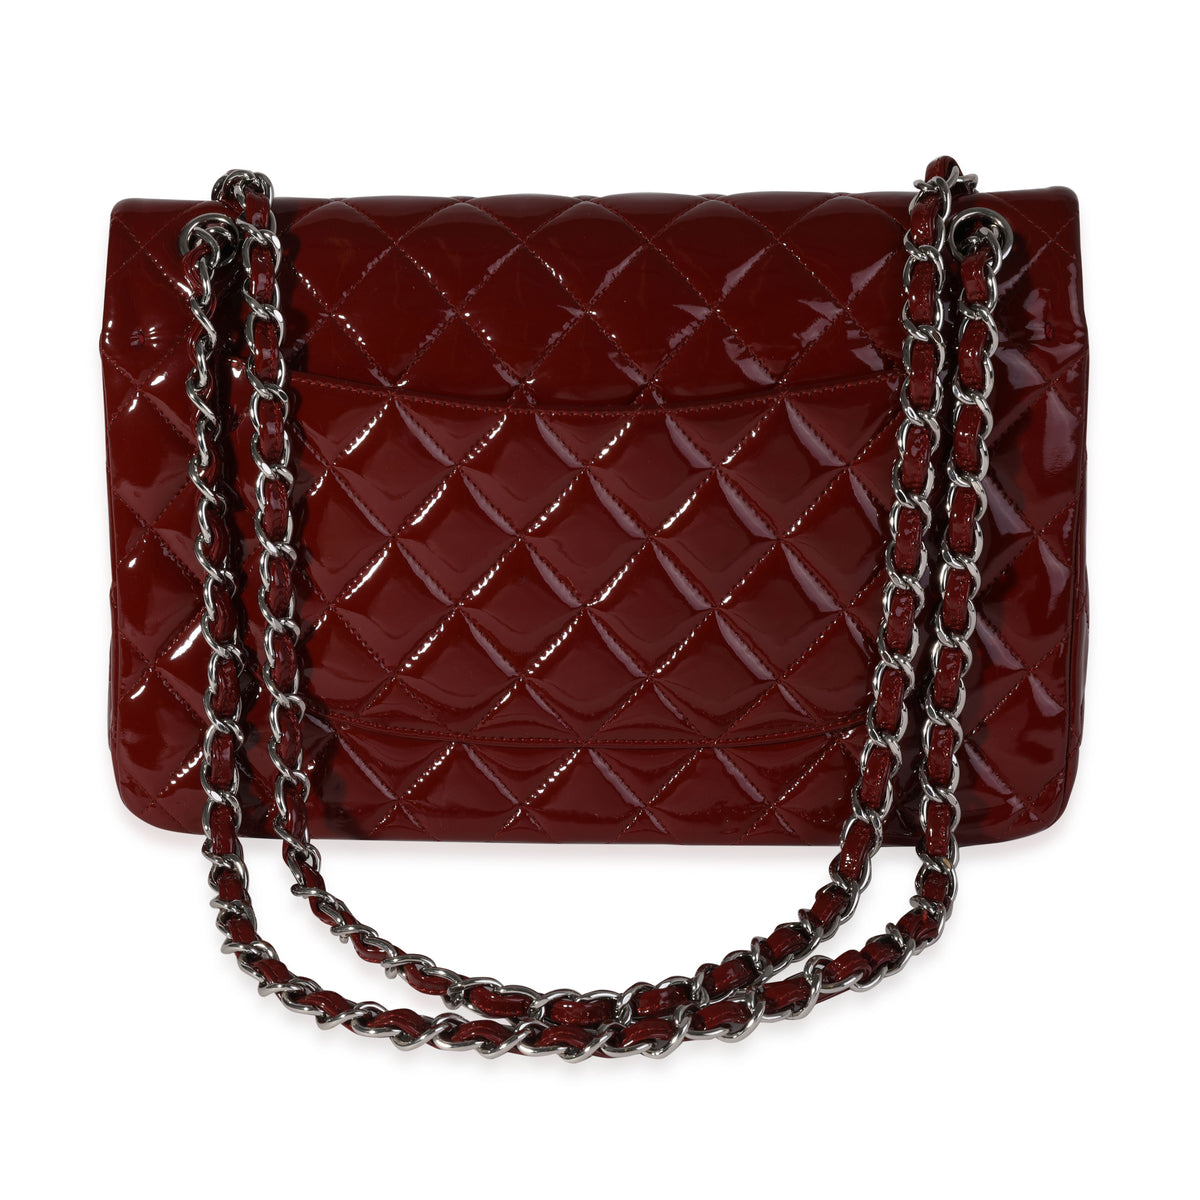 Chanel Dark Red Quilted Patent Leather Jumbo Classic Double Flap Bag